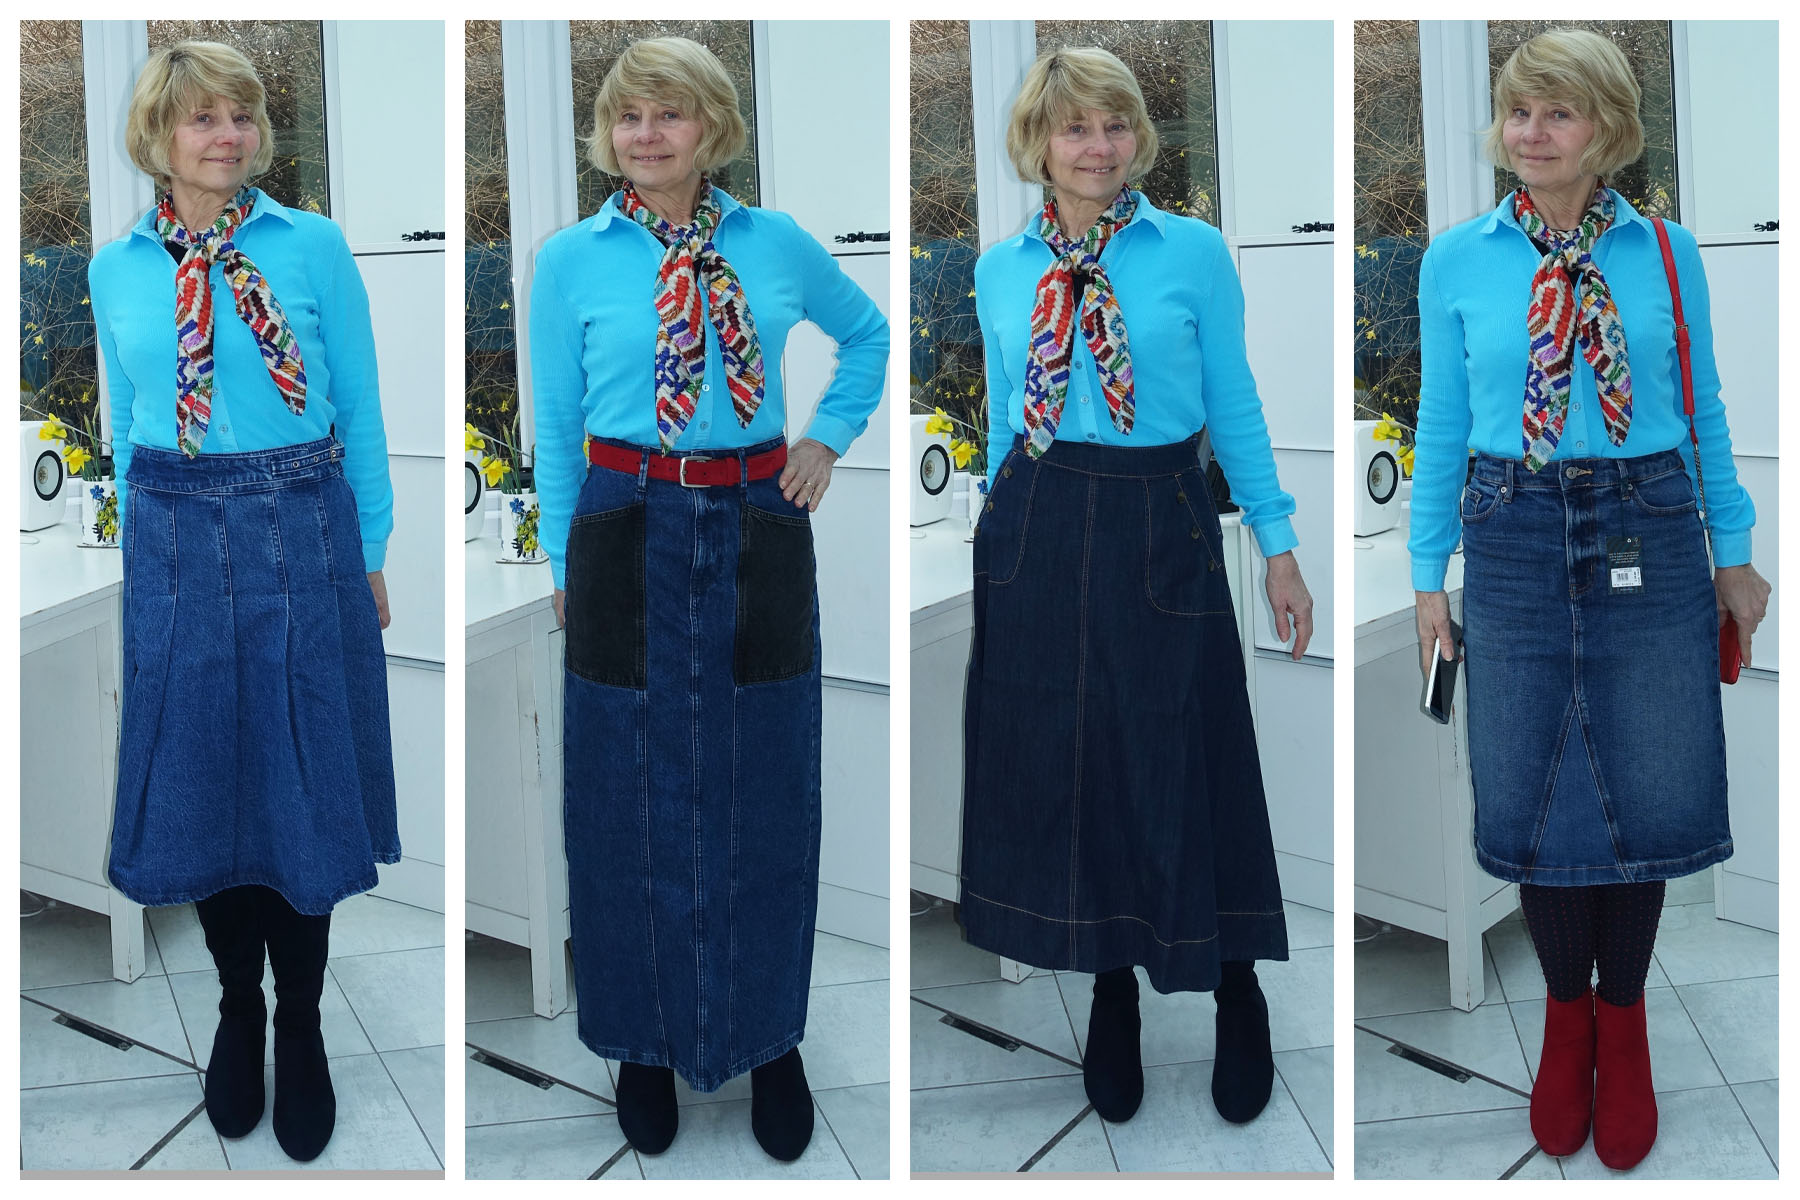 Gail Hanlon from Is This Mutton tries on four different length and style of denim skirt